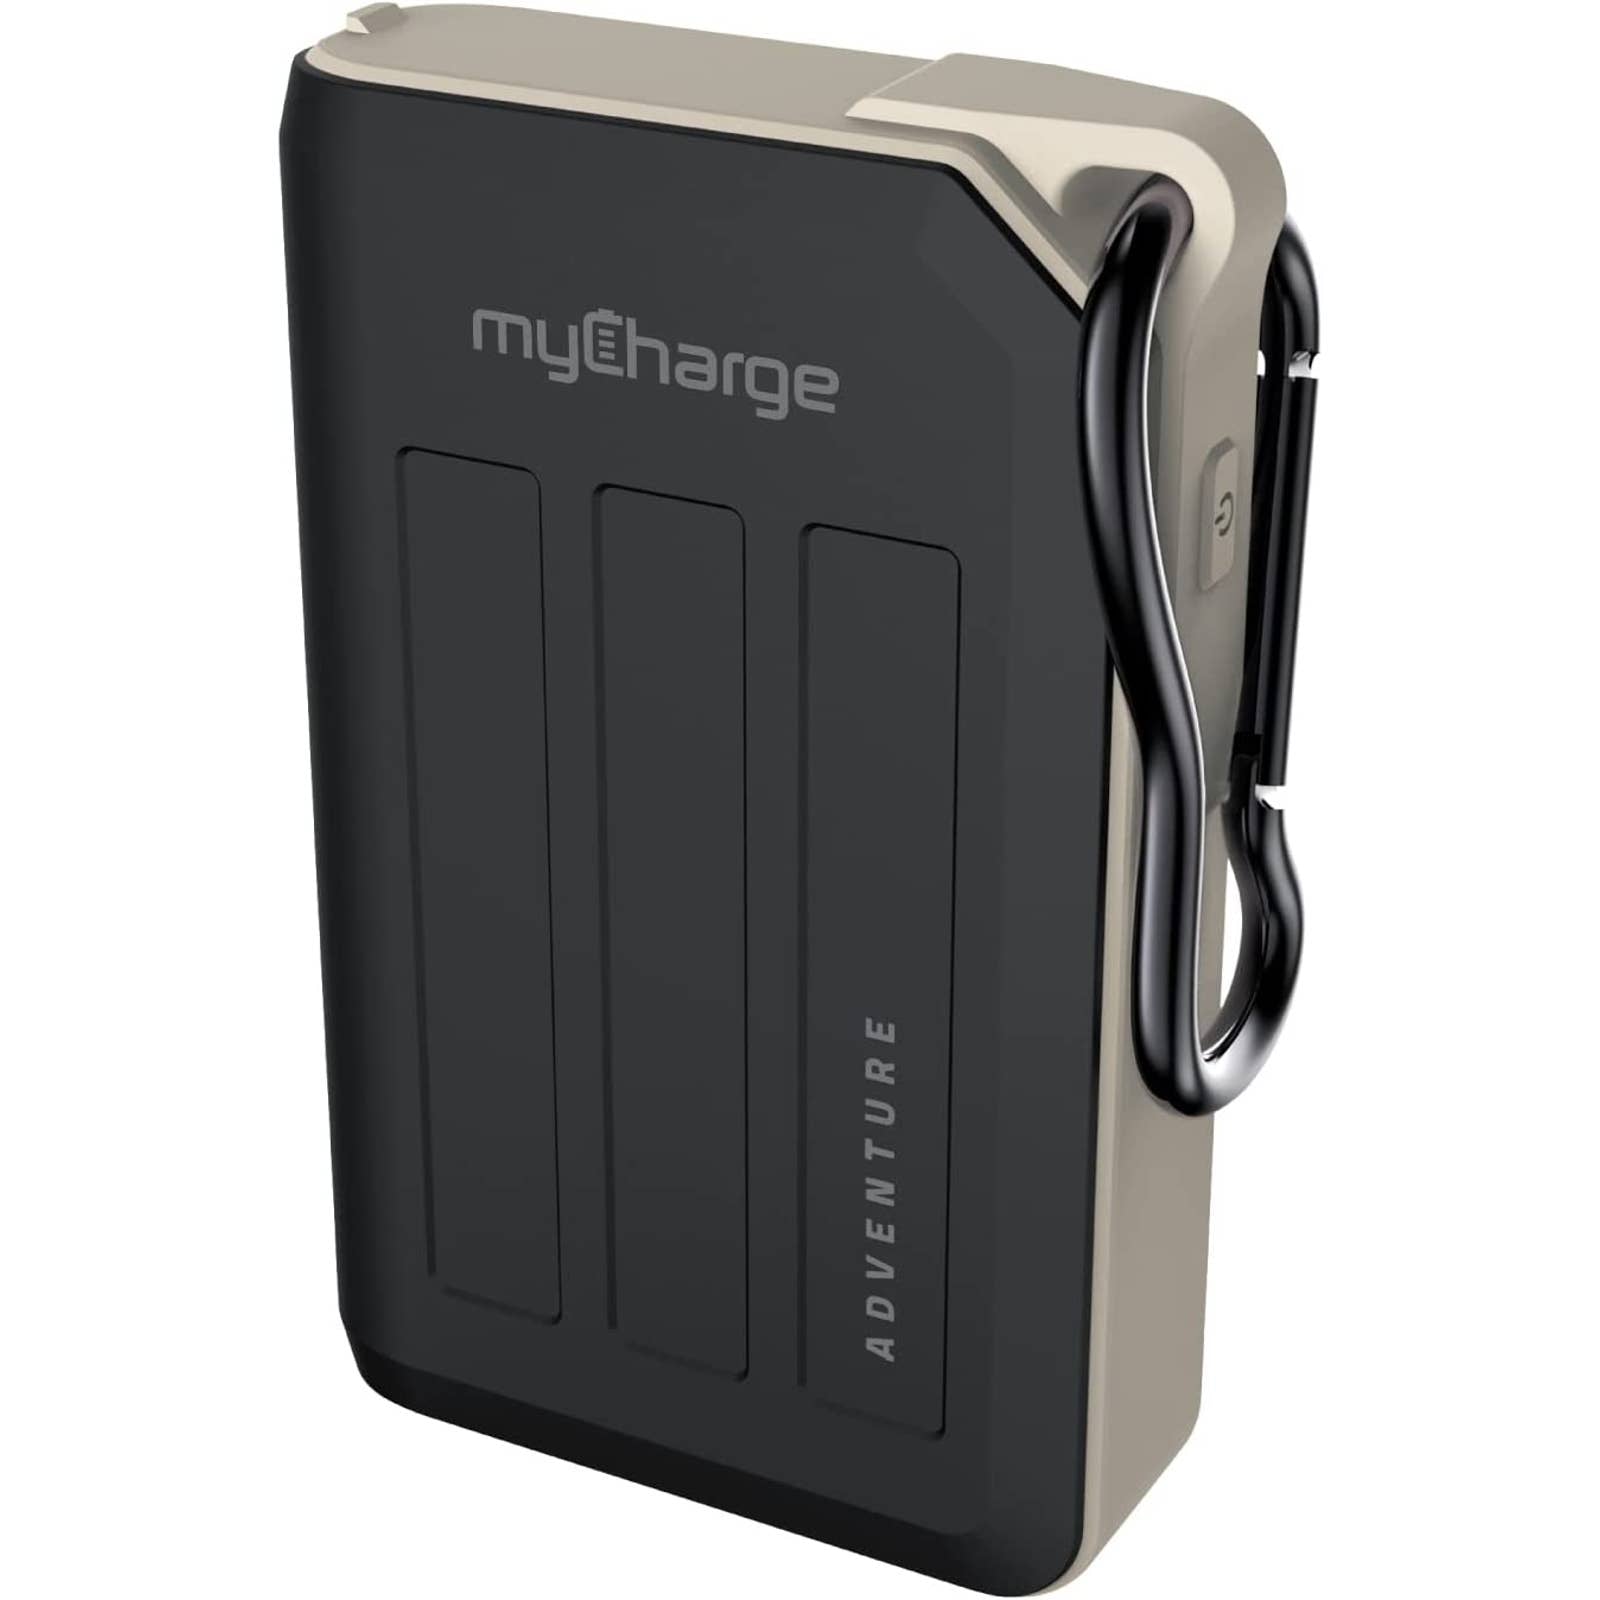 myCharge - AHCT10KG Adventure H2O Turbo 10,050 mAh Portable Charger for Most USB Enabled Devices - Gray